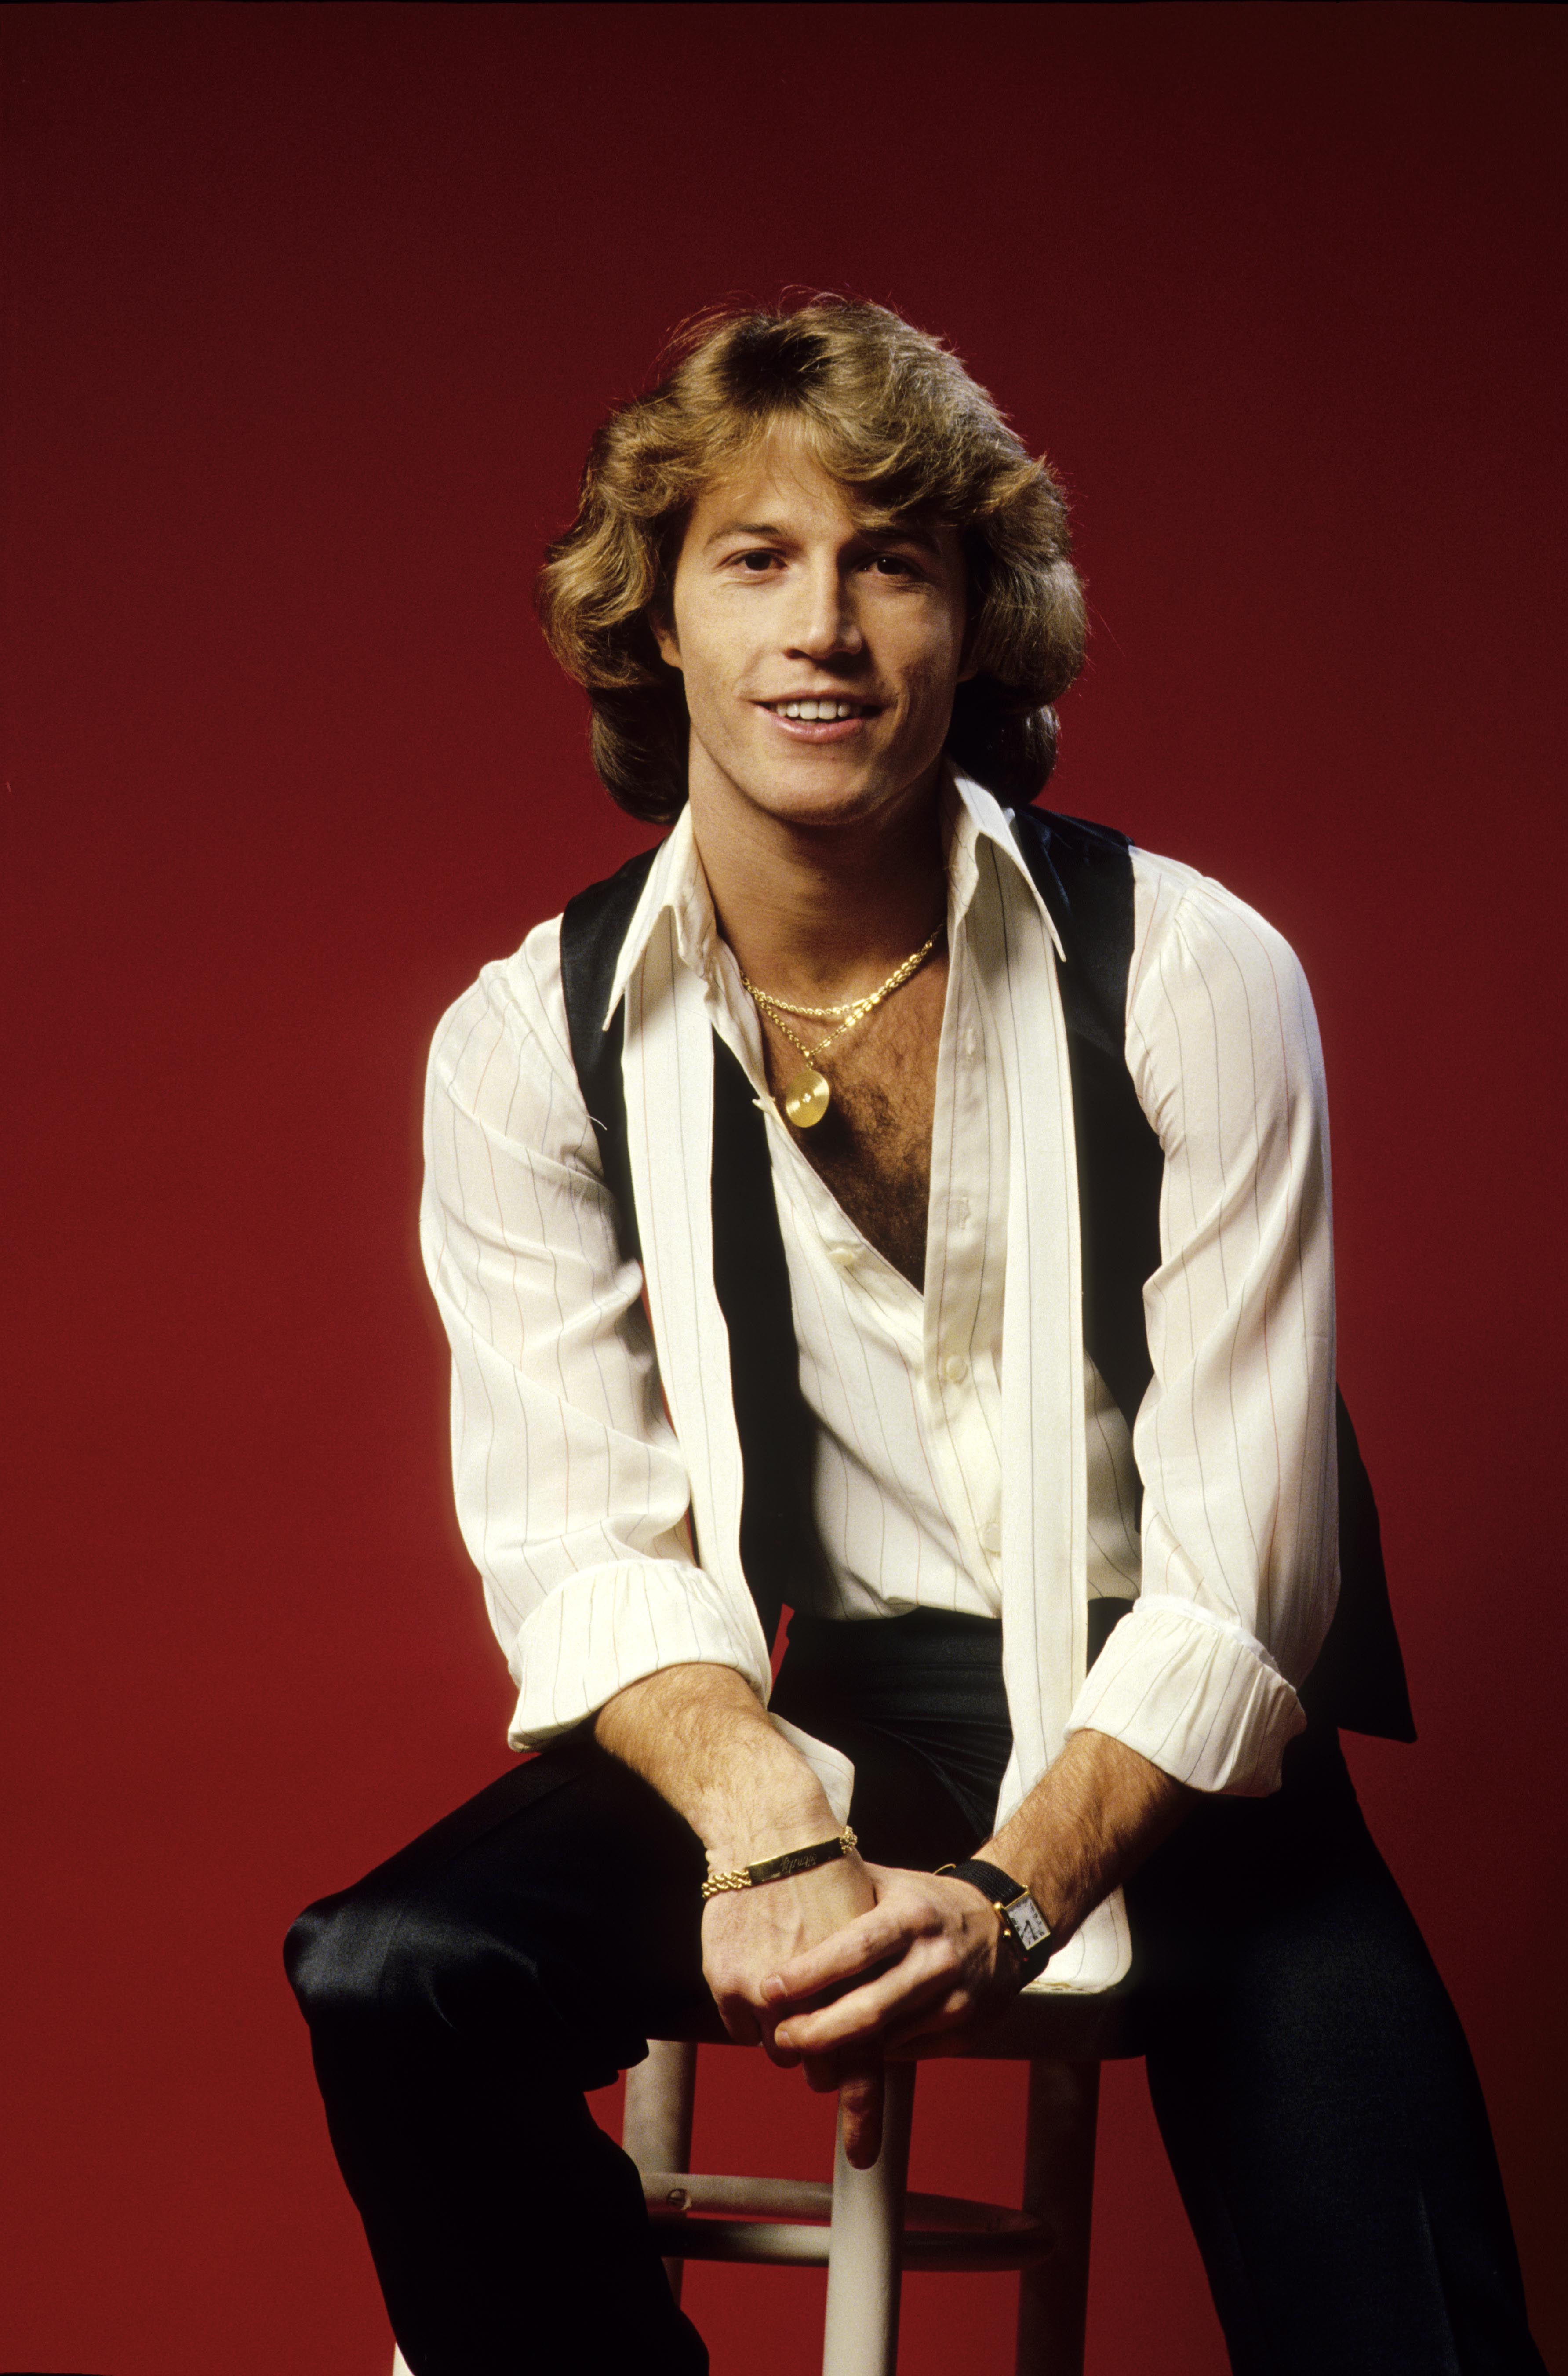 Studio portrait of Andy Gibb in the United Kingdom on January 1, 1978 | Source: Getty Images